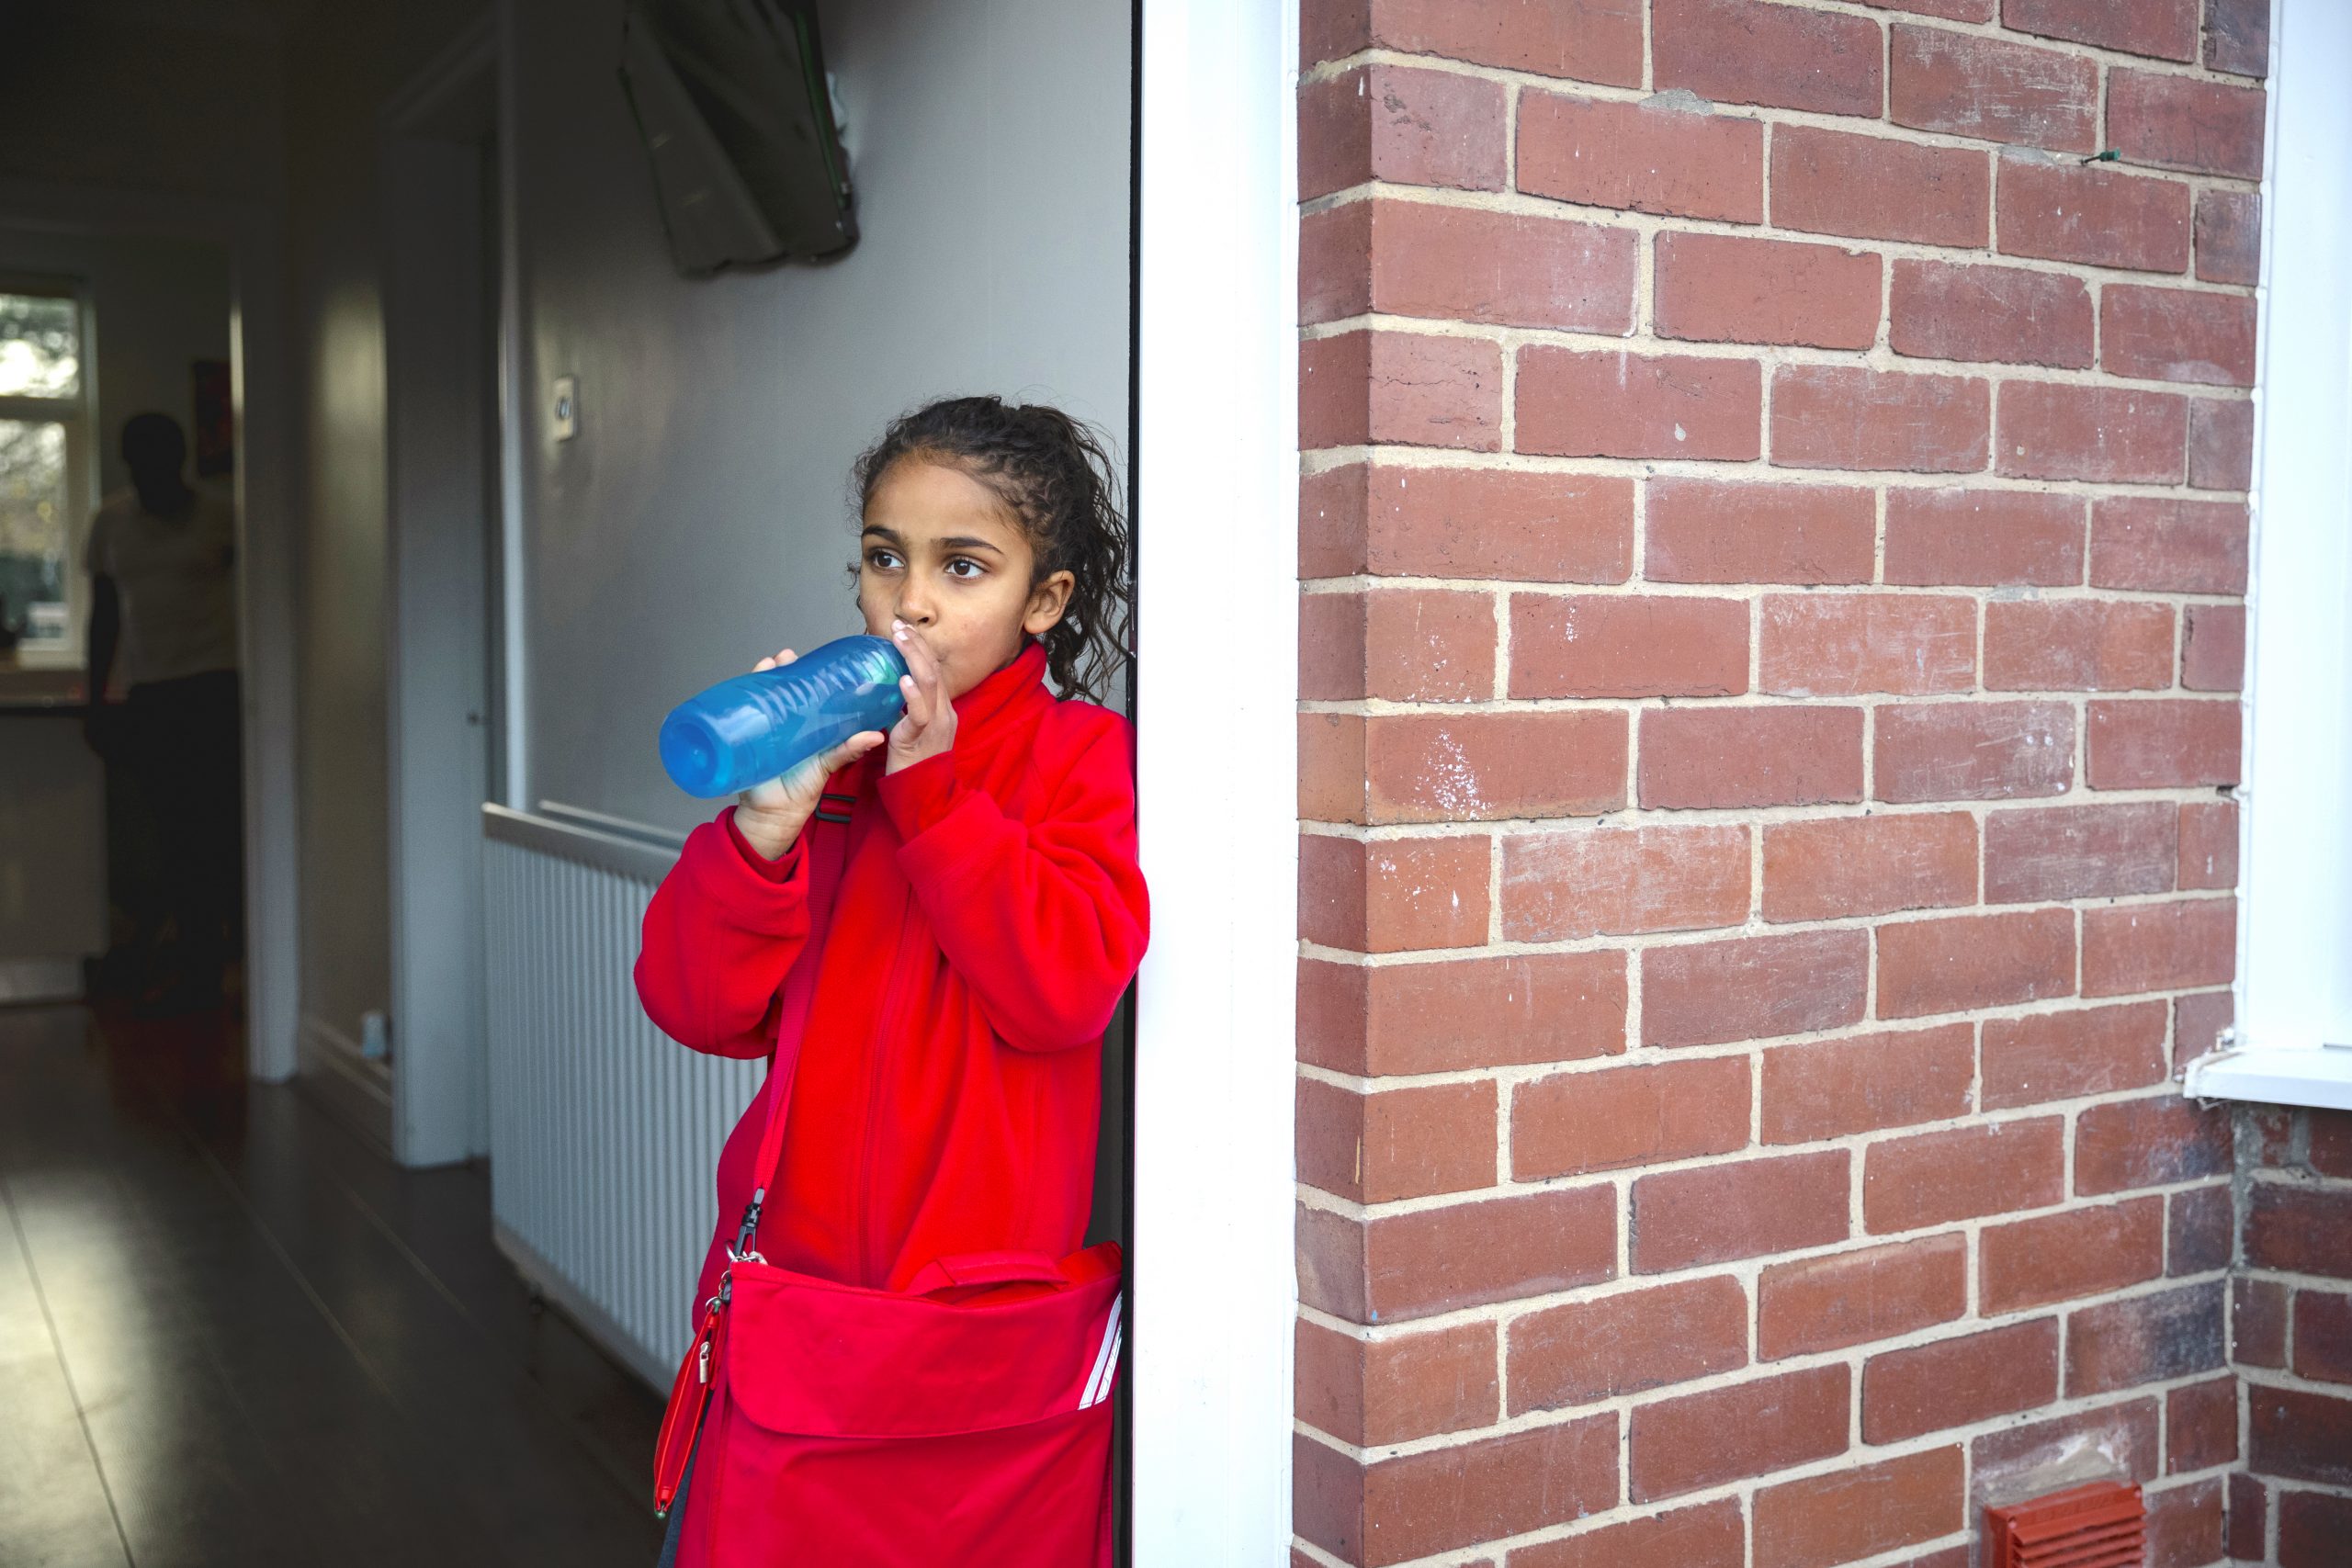 School-aged girl drinking water from a reusable water bottle